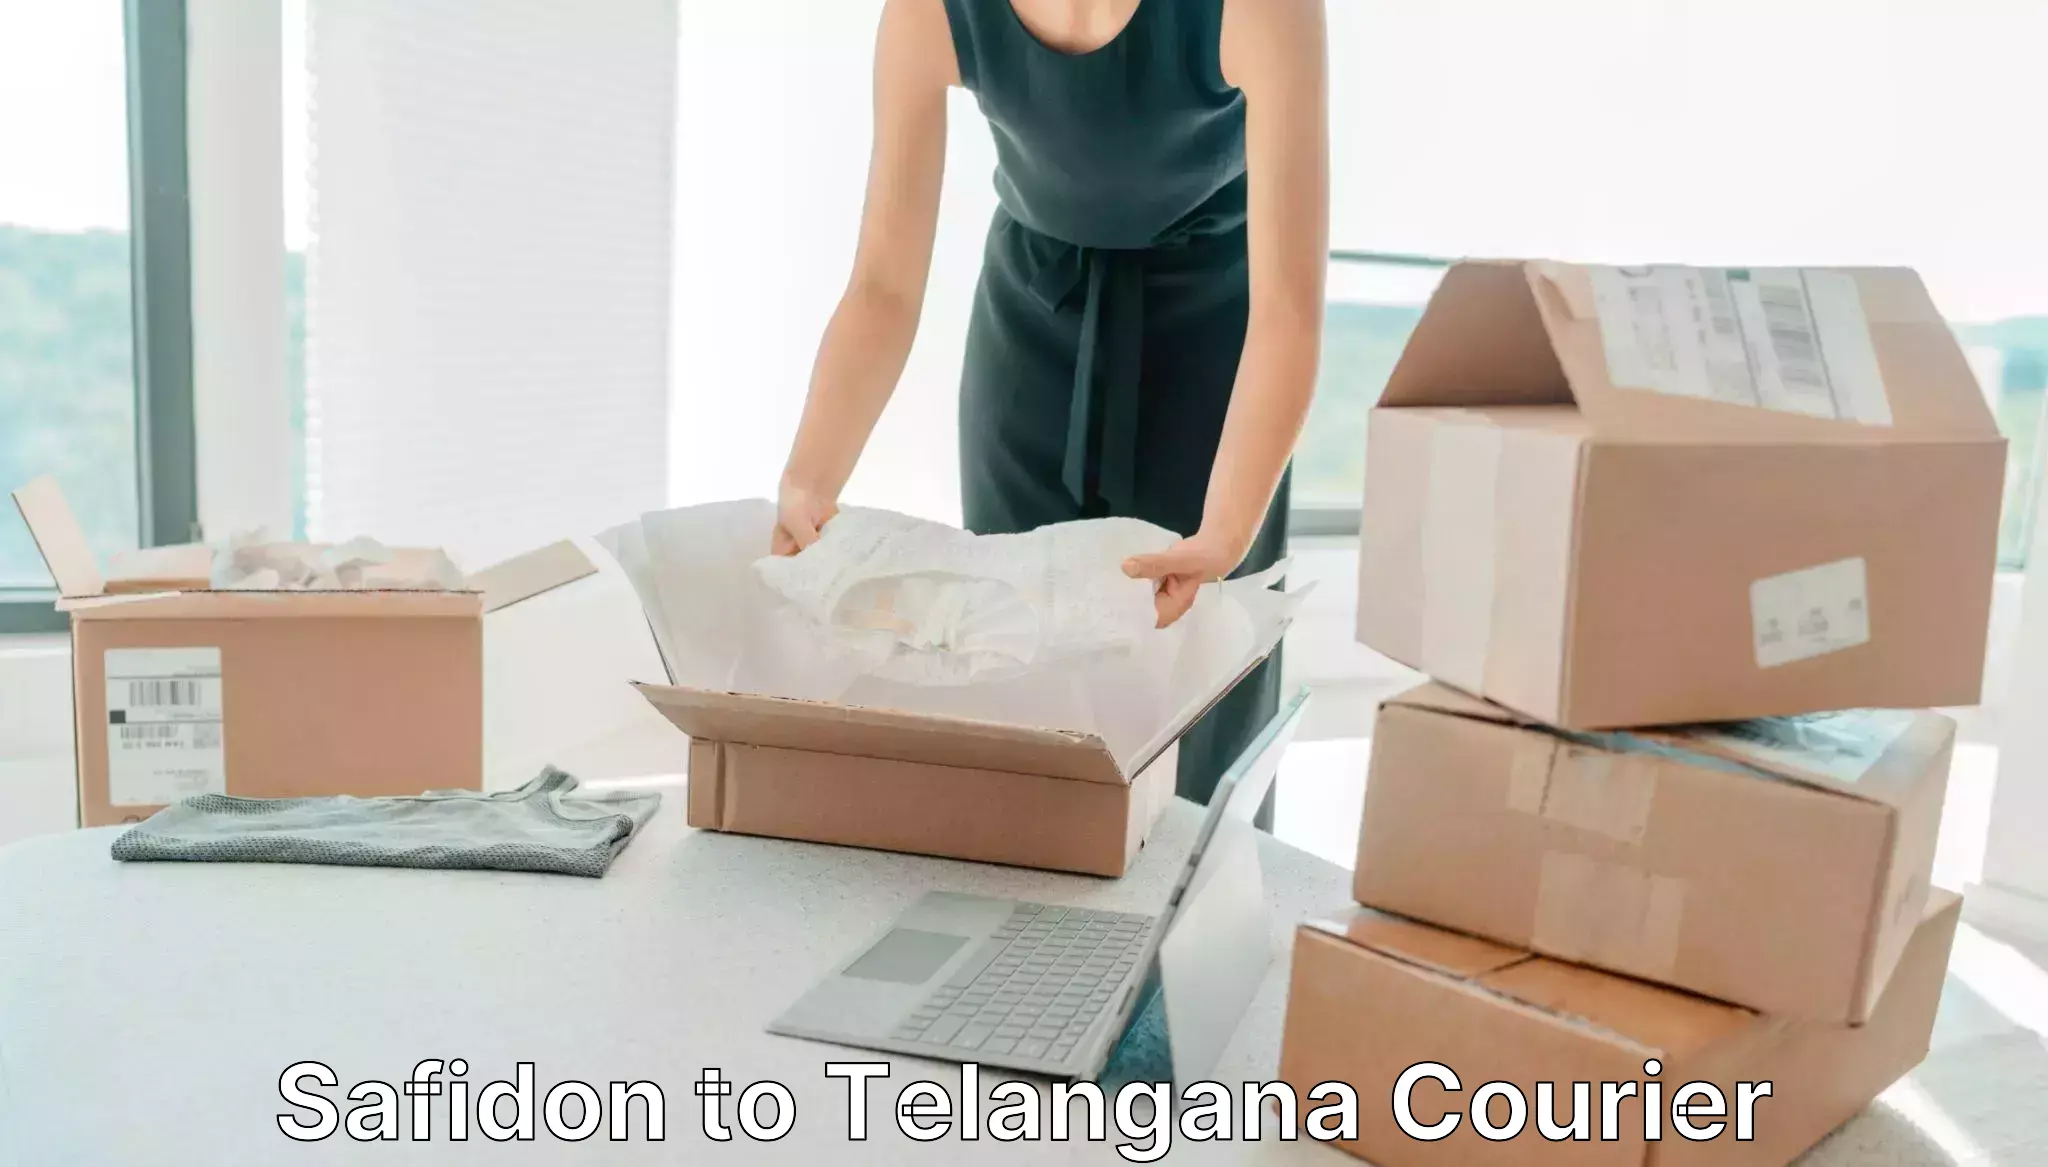 State-of-the-art courier technology Safidon to Mancherial